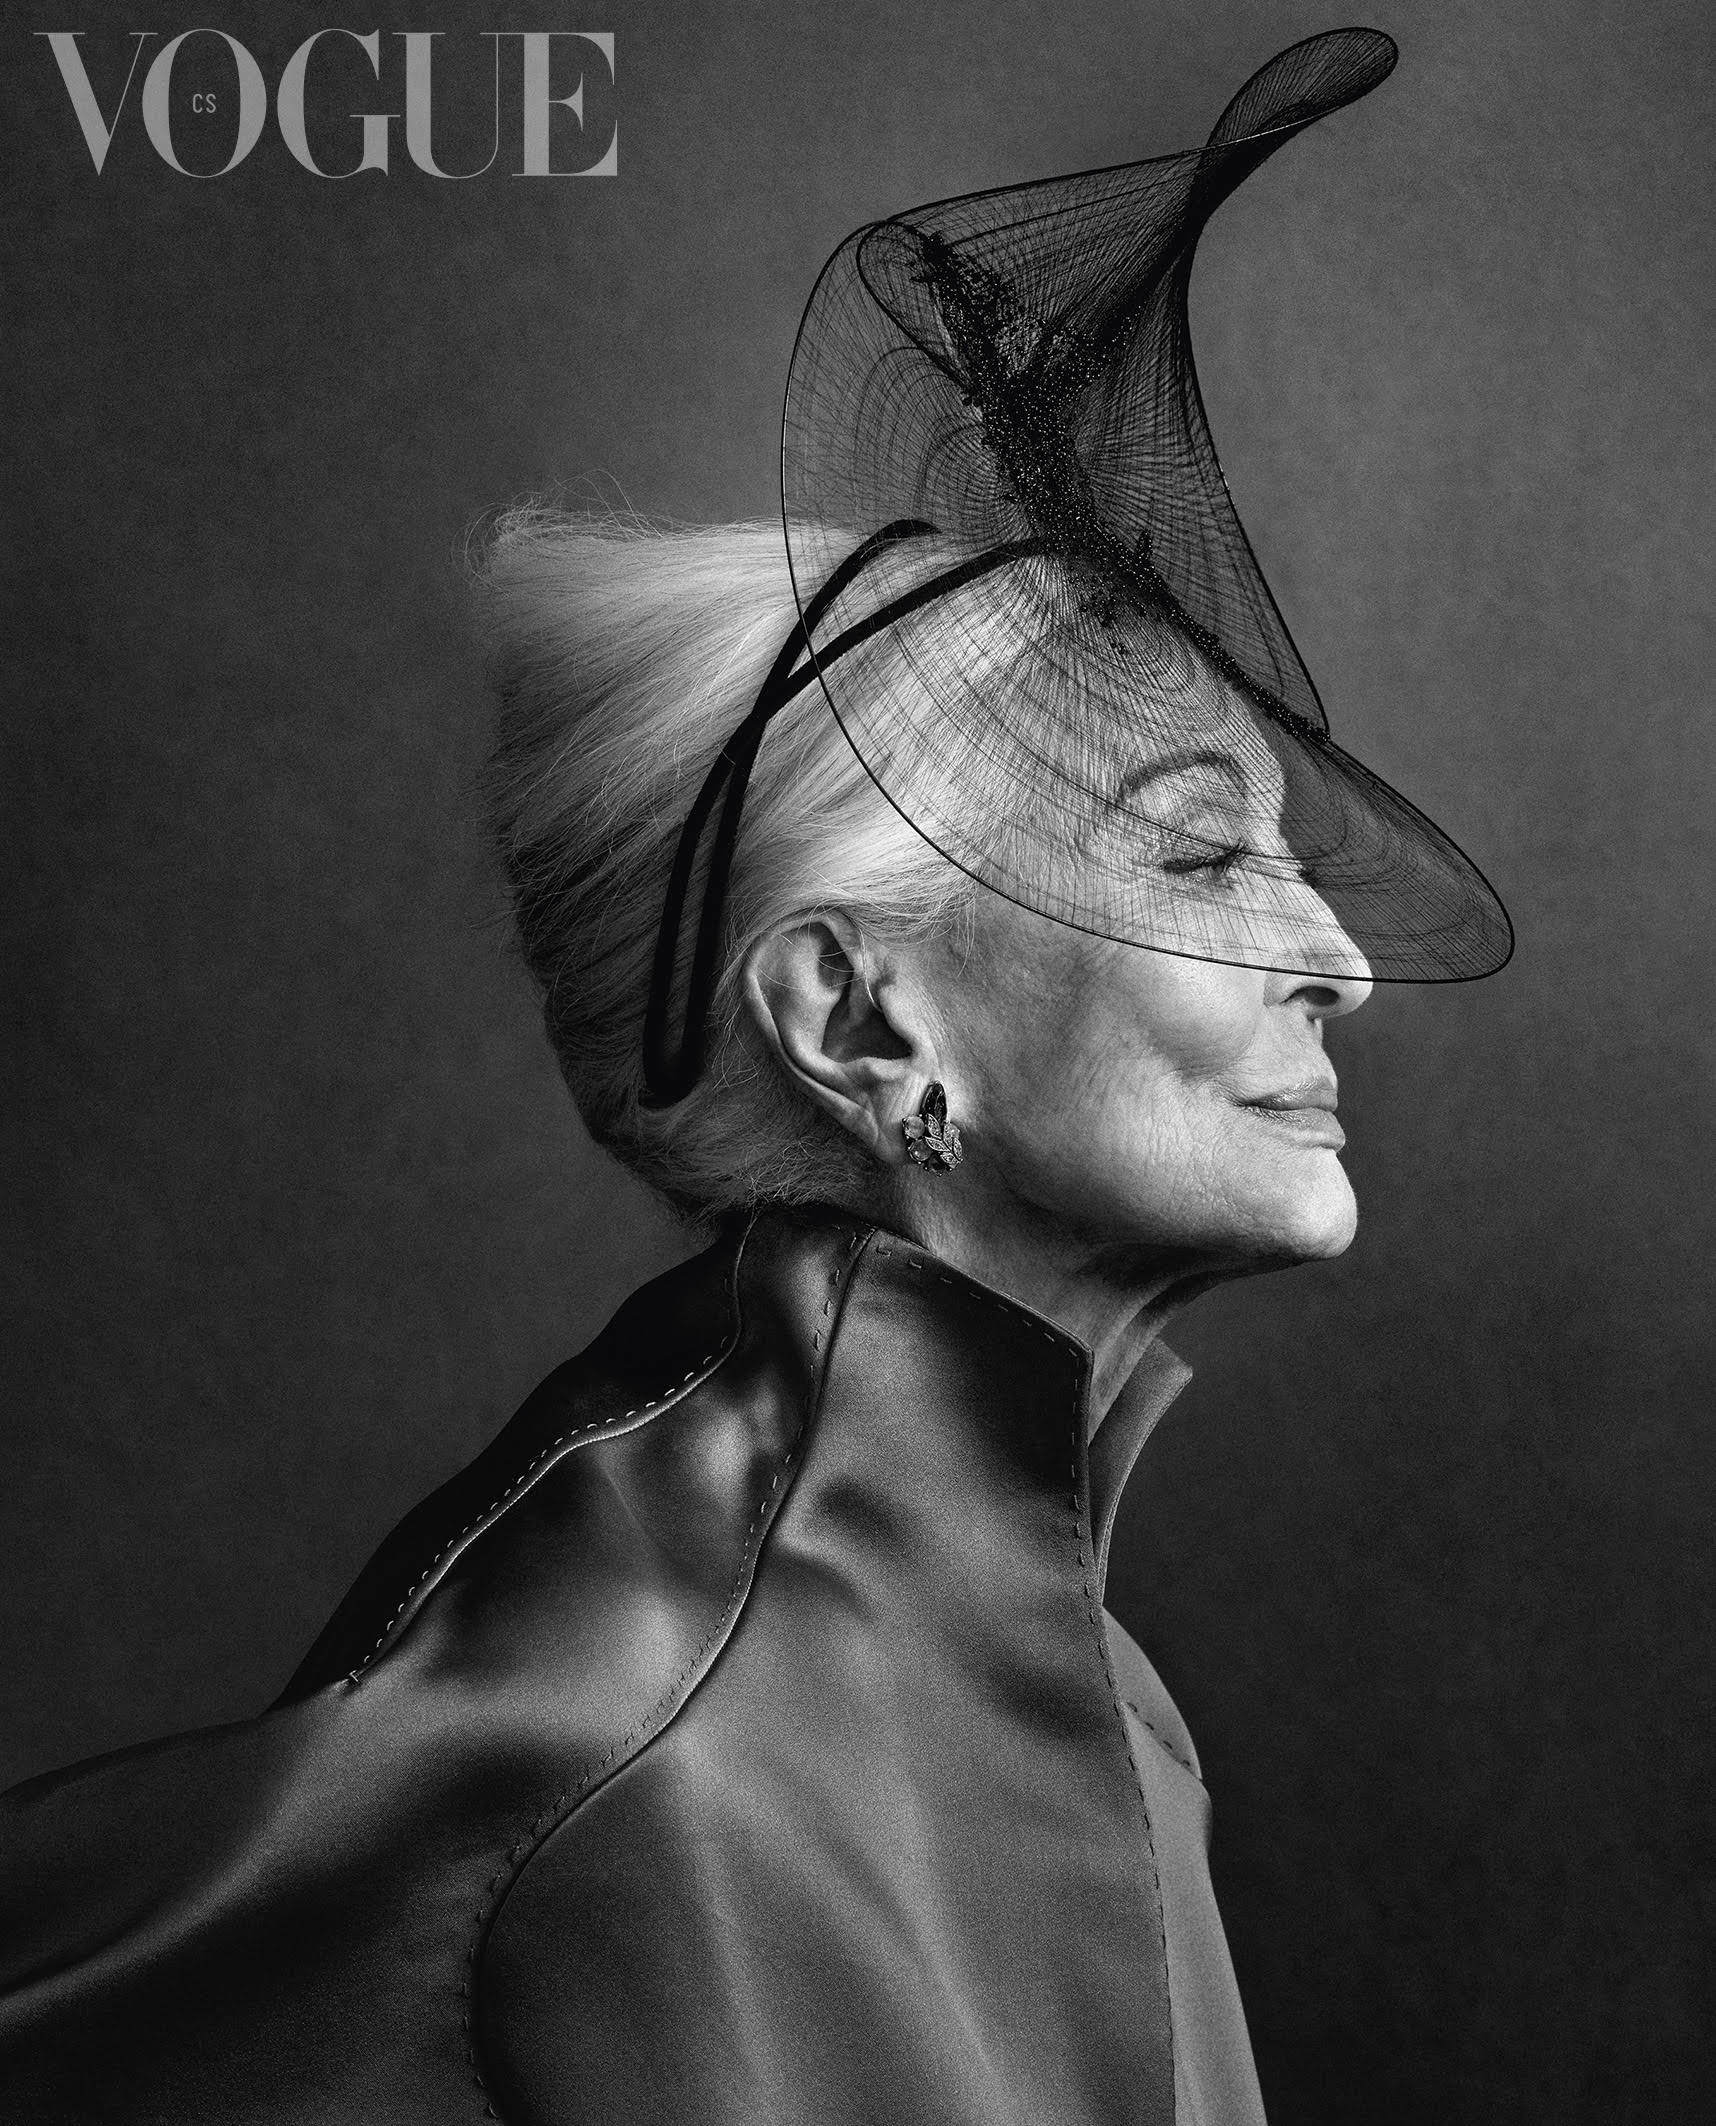 At 91 she's one of the oldest Vogue cover girls – but she doesn't care: meet Vogue Czechoslovakia's Carmen Dell'Orefice | South China Morning Post